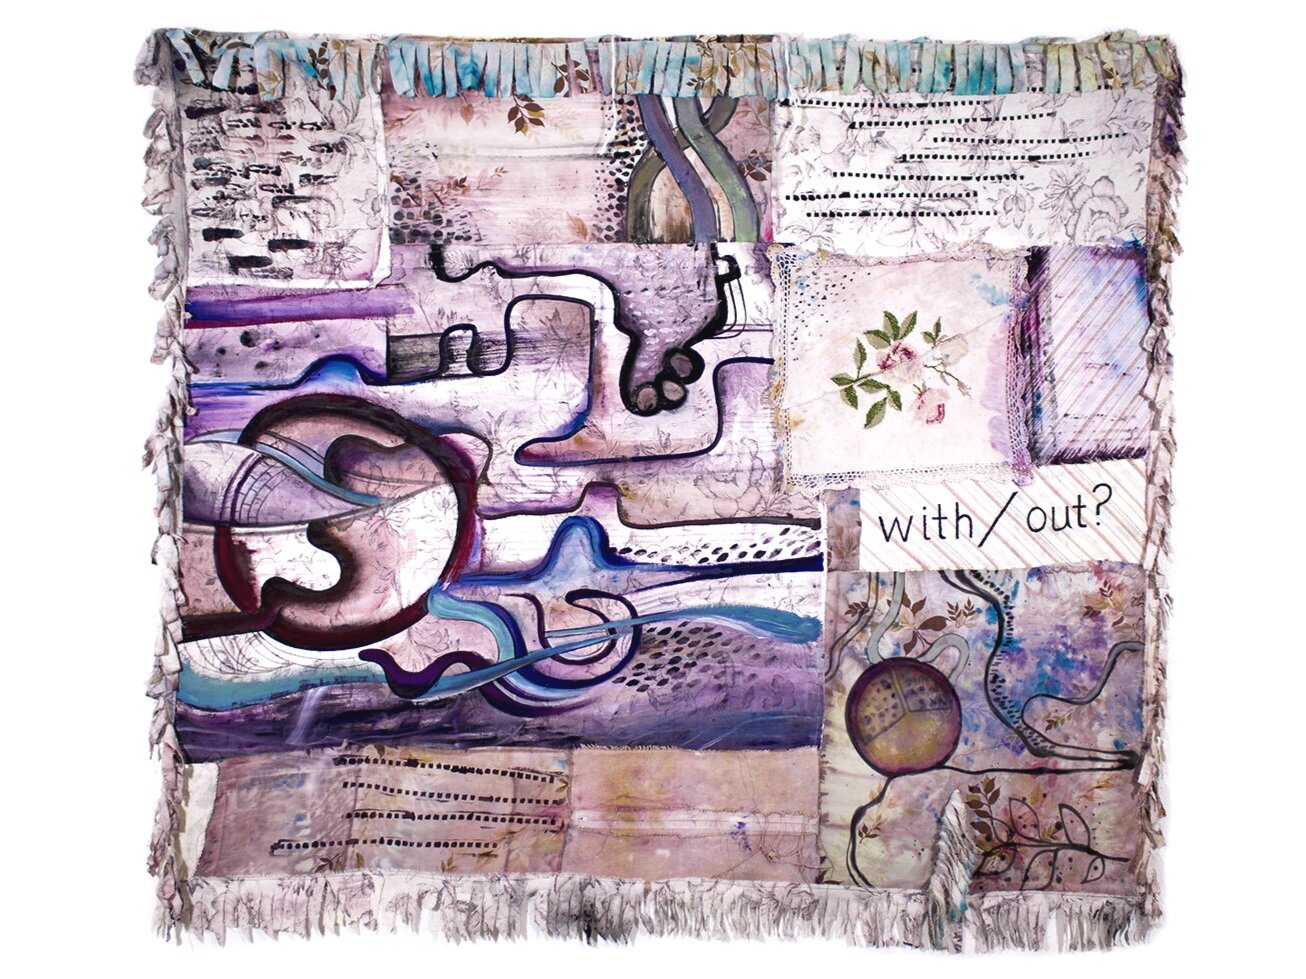   With/Out?   Hand sewn fabric tapestry made from acrylic paint, thread, zipper, found linens, and tears, 2018, 5’ x 4’.     